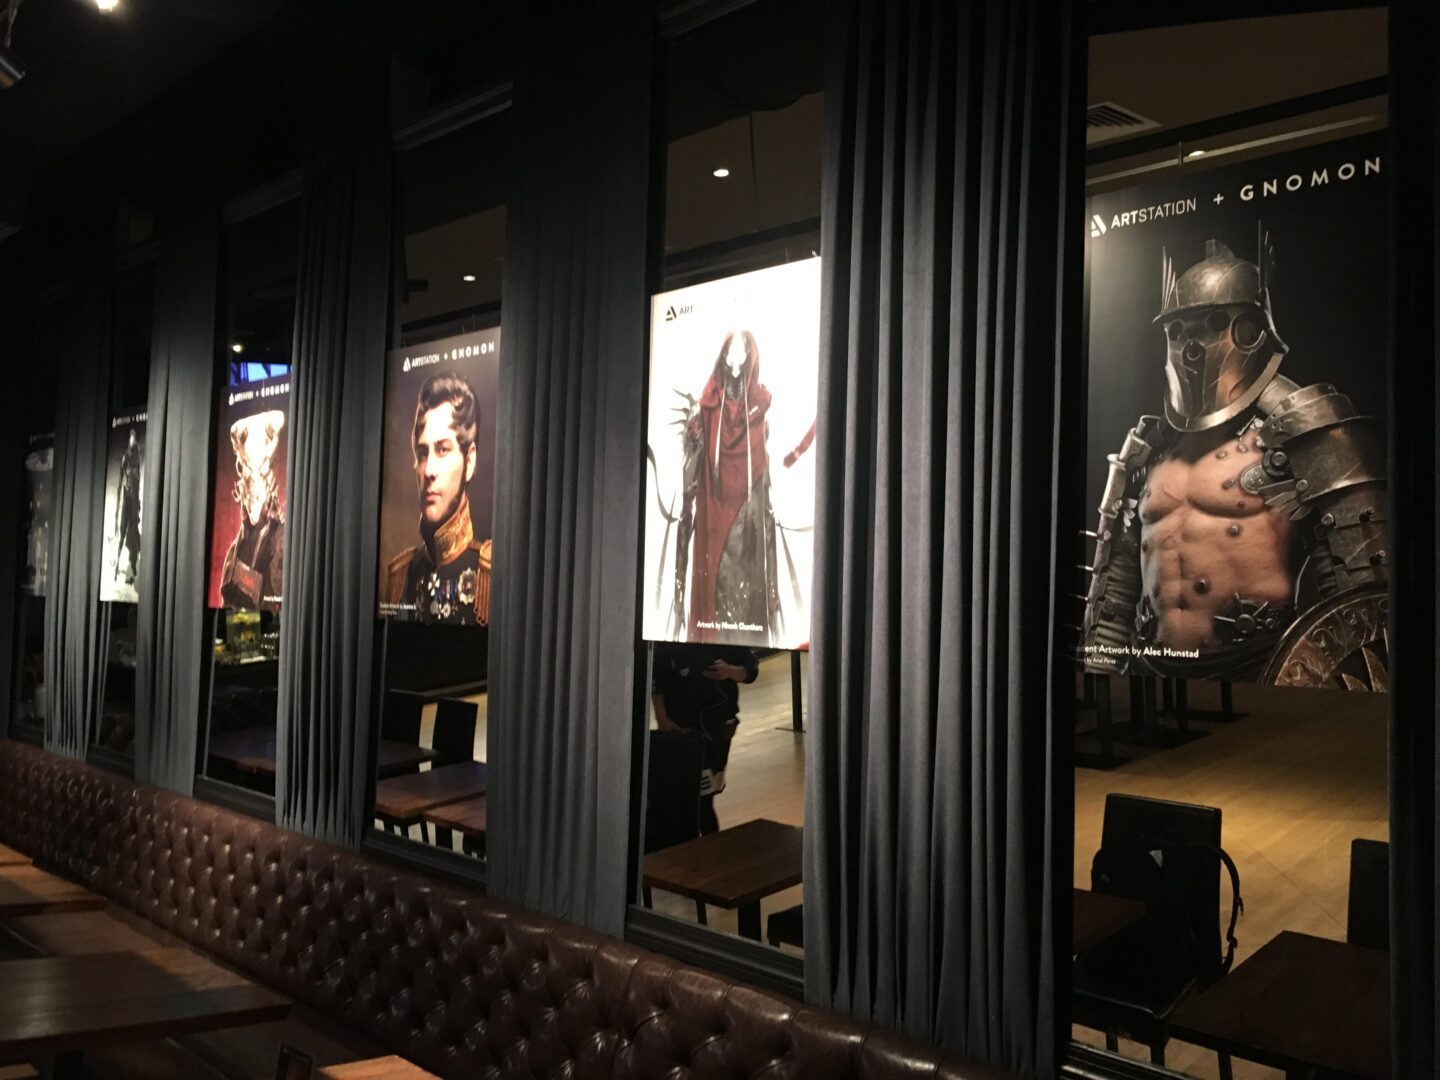 A room with several movie posters on the wall.